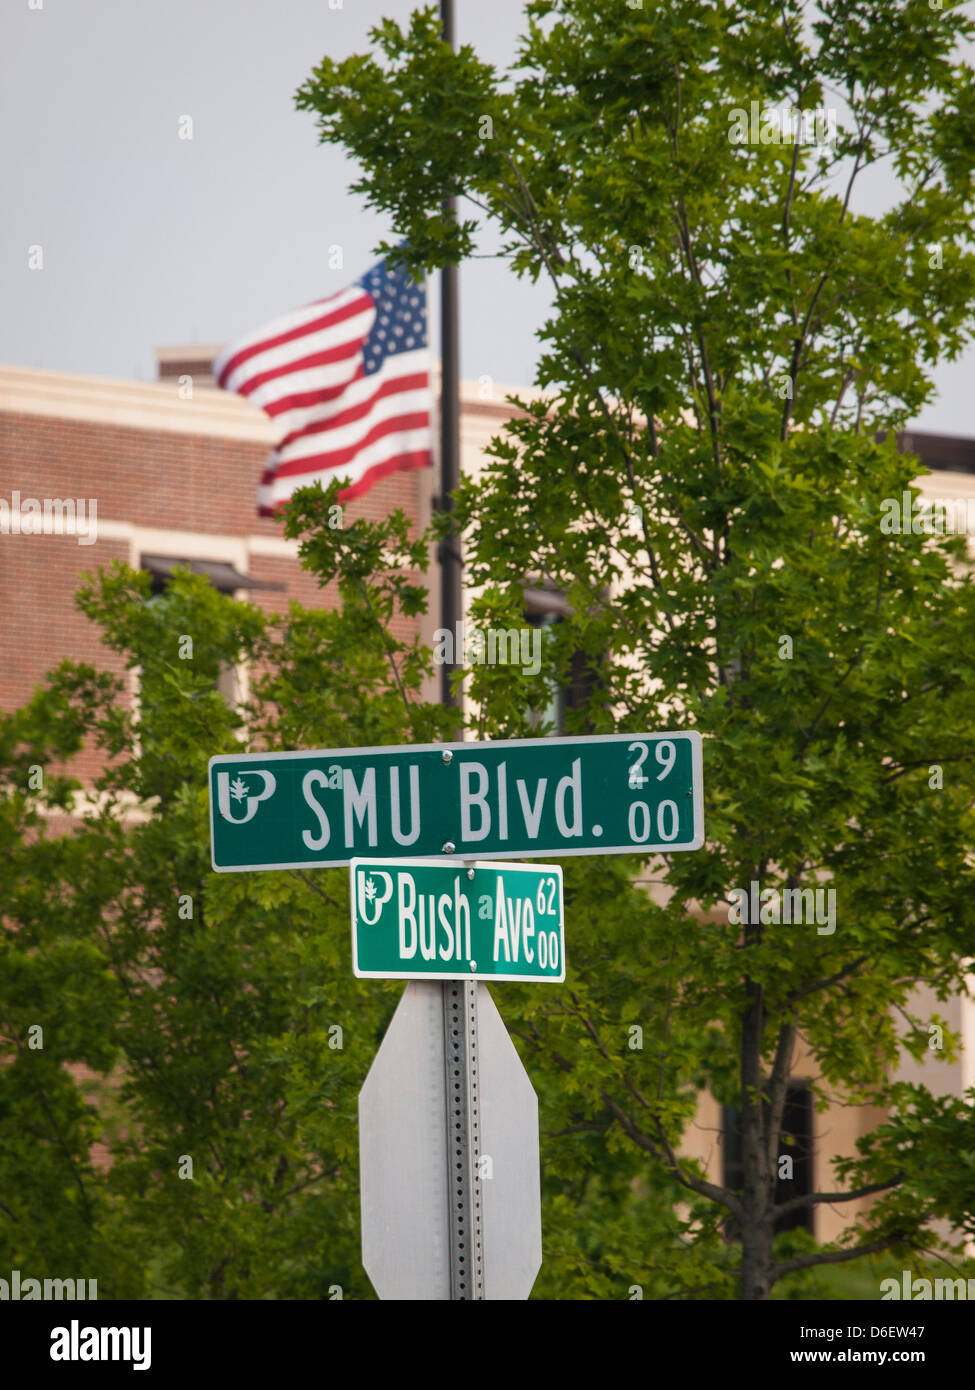 At the intersection of SMU and Bush, the flag outside the George W Bush Presidential Library on the campus of Southern Methodist University features replica of White House oval office along with memories of 911 and entering into war. Stock Photo